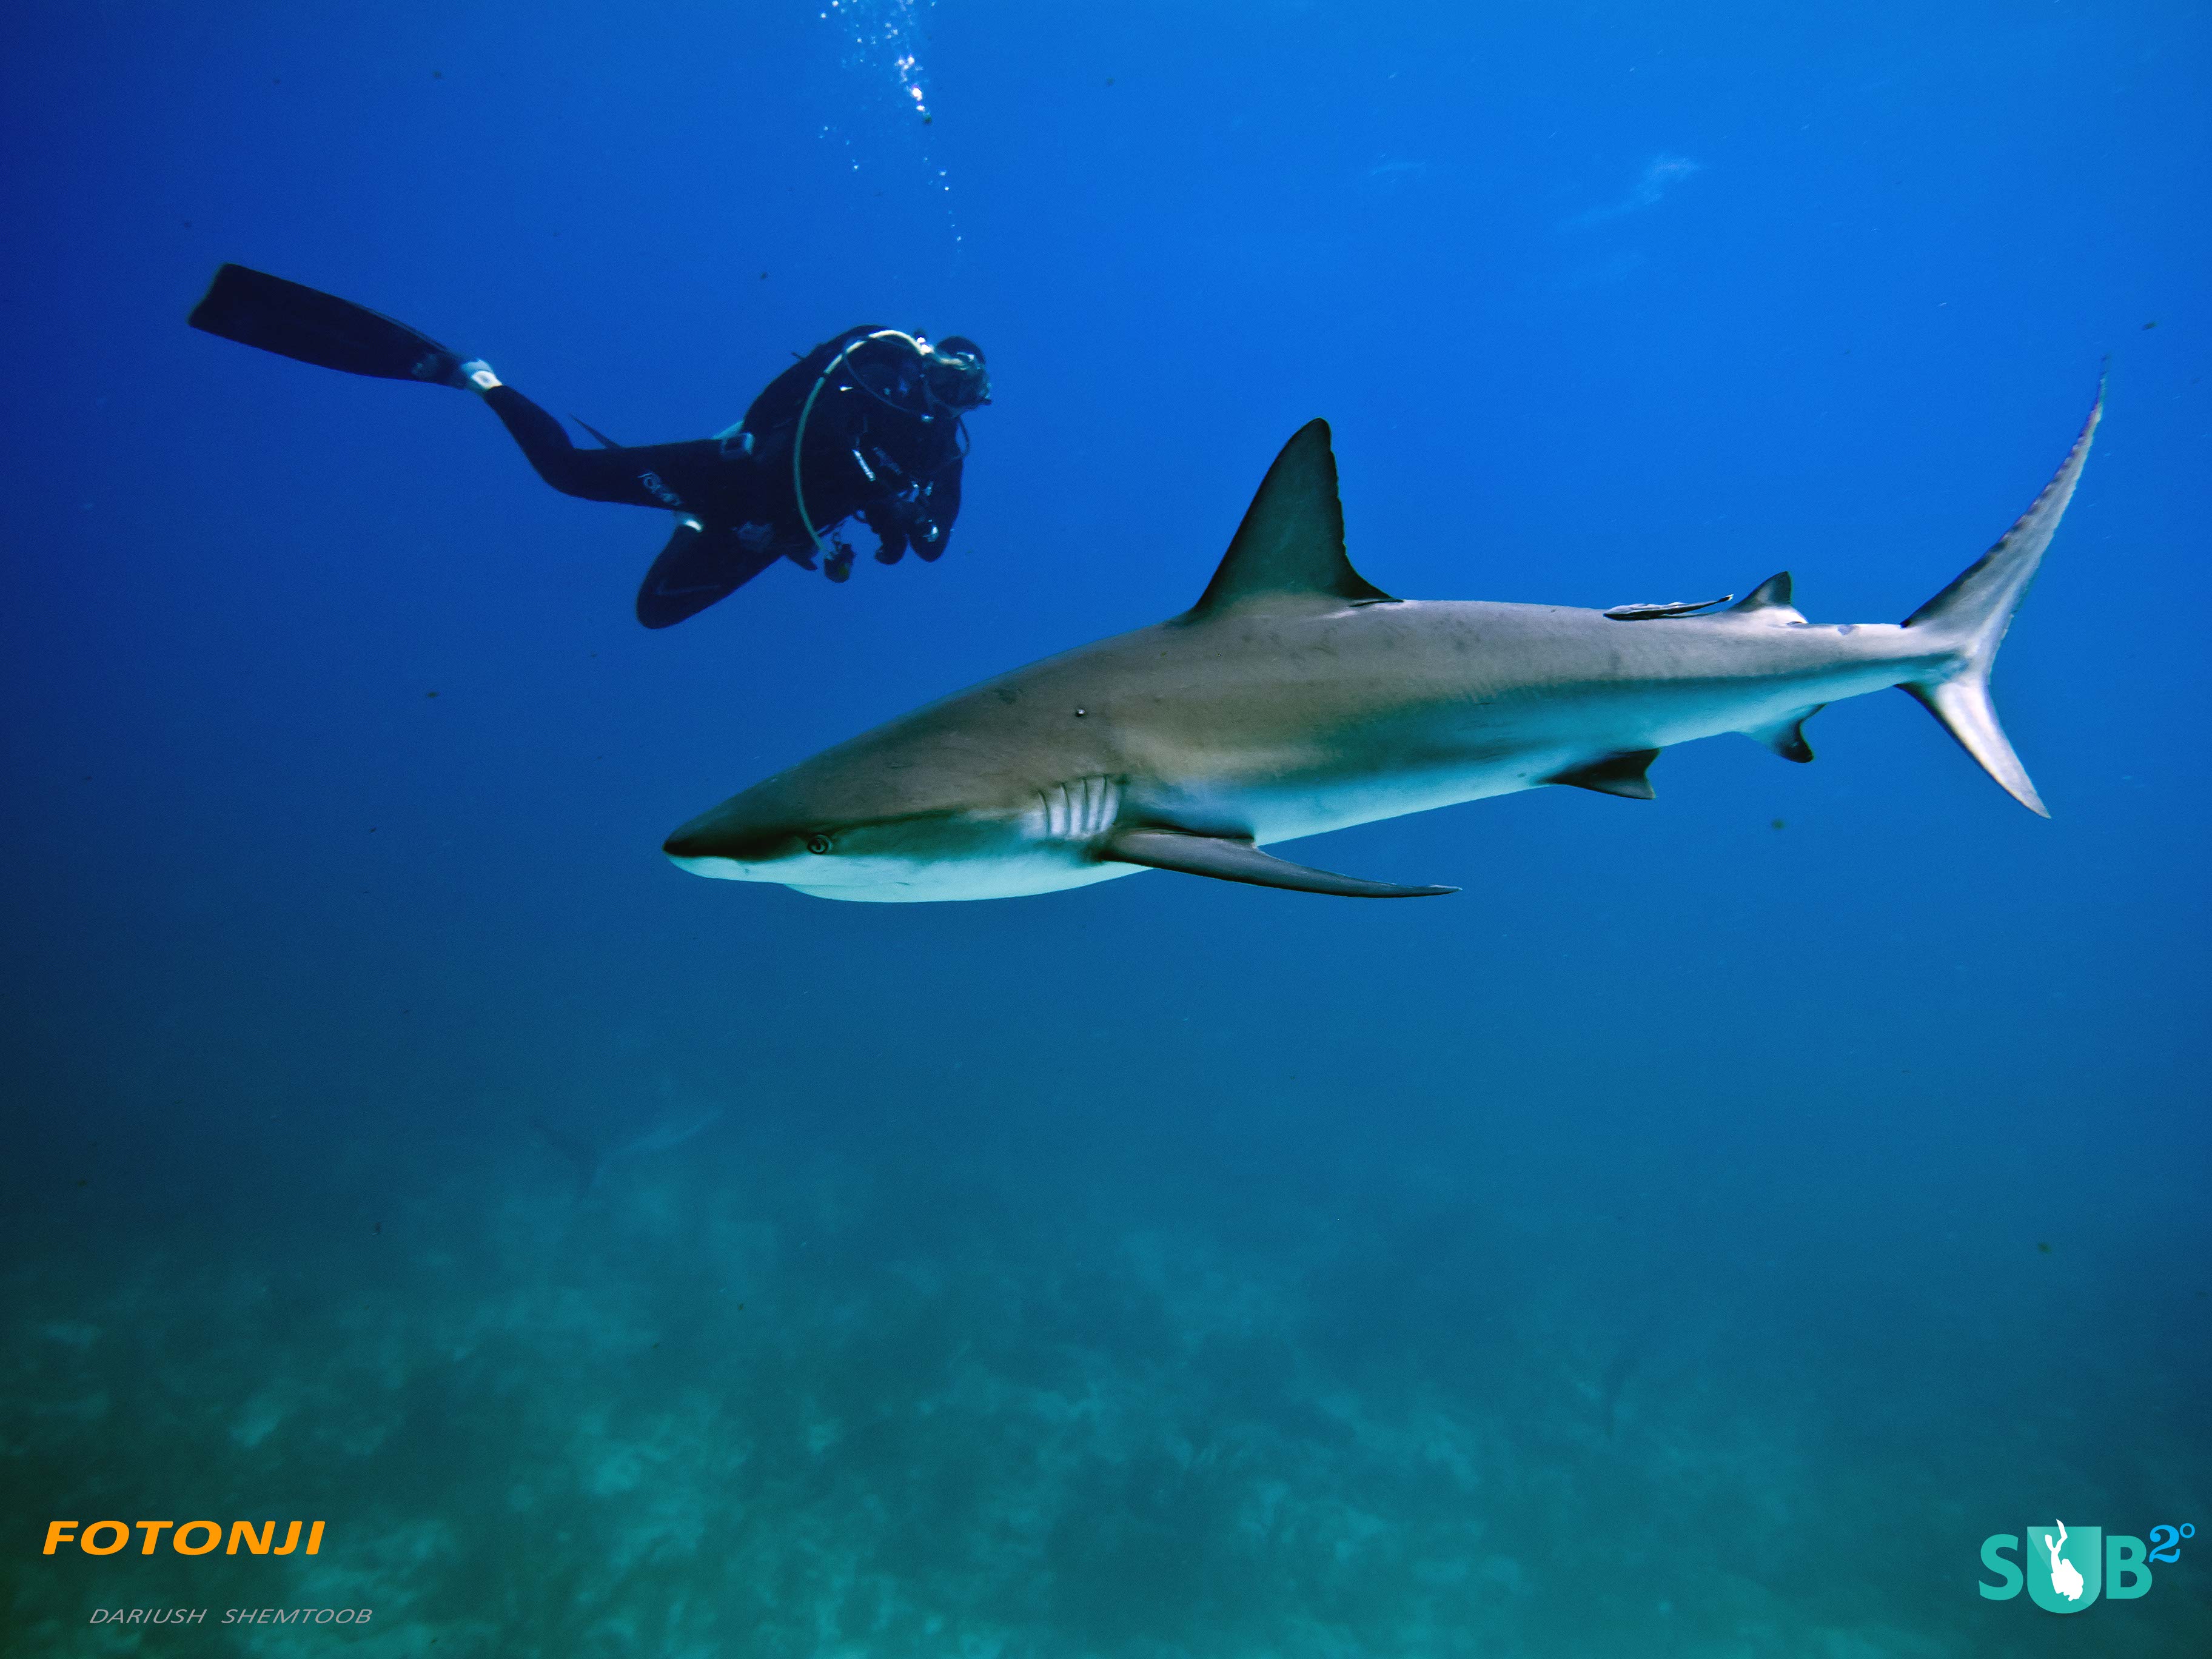 Accustomed to divers' presence, reef sharks circle around, waiting for the feeding to begin.